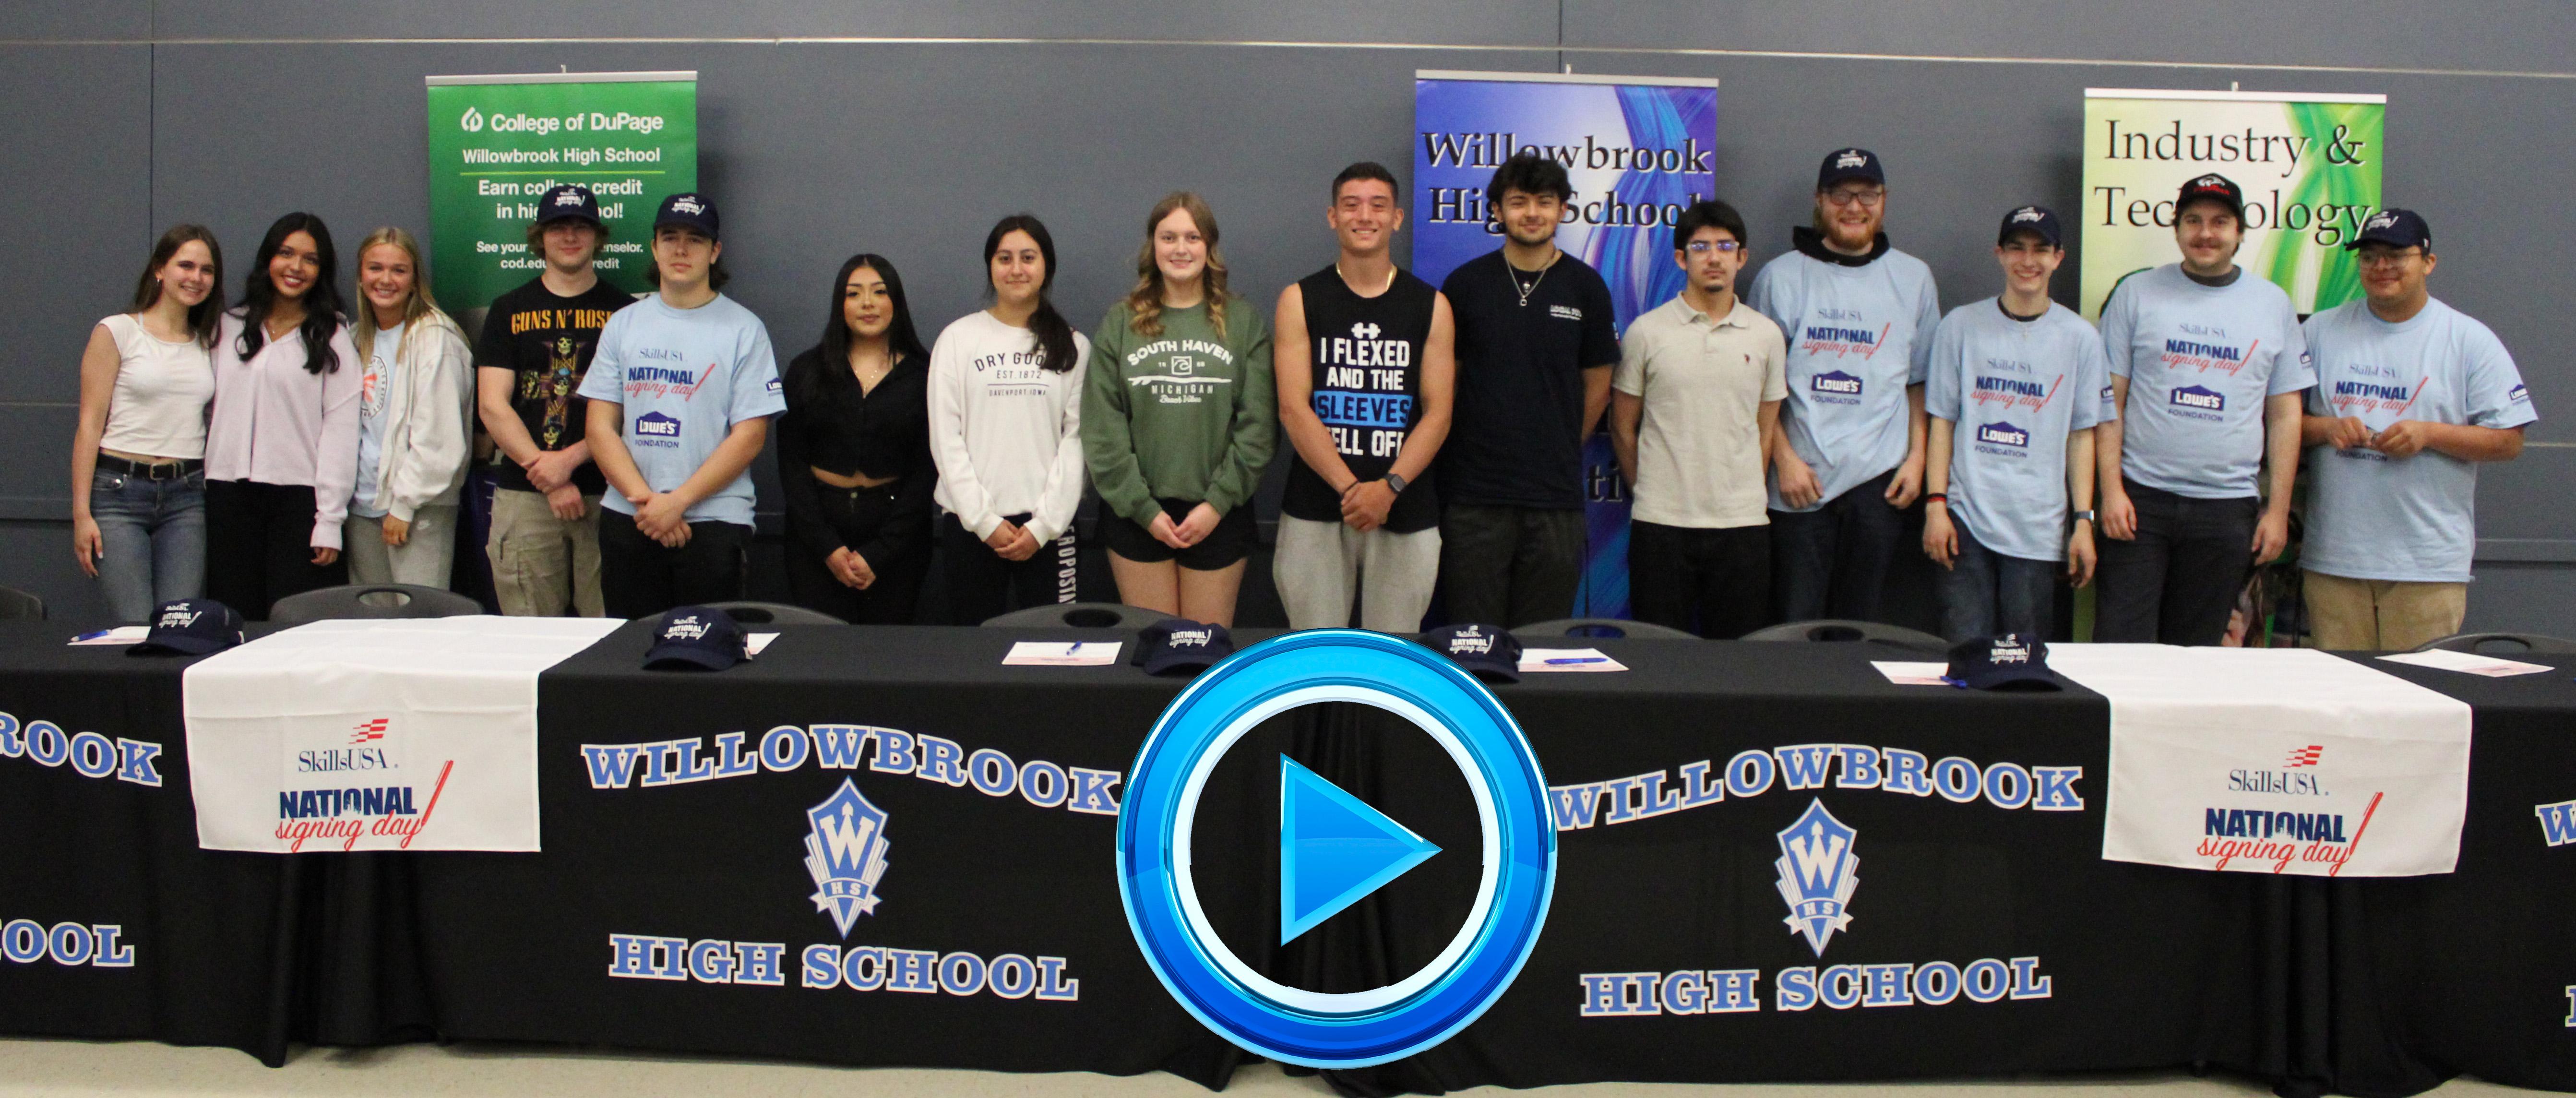 Willowbrook hosts vocational signing day for students who plan to pursue careers in the skilled trades and education field